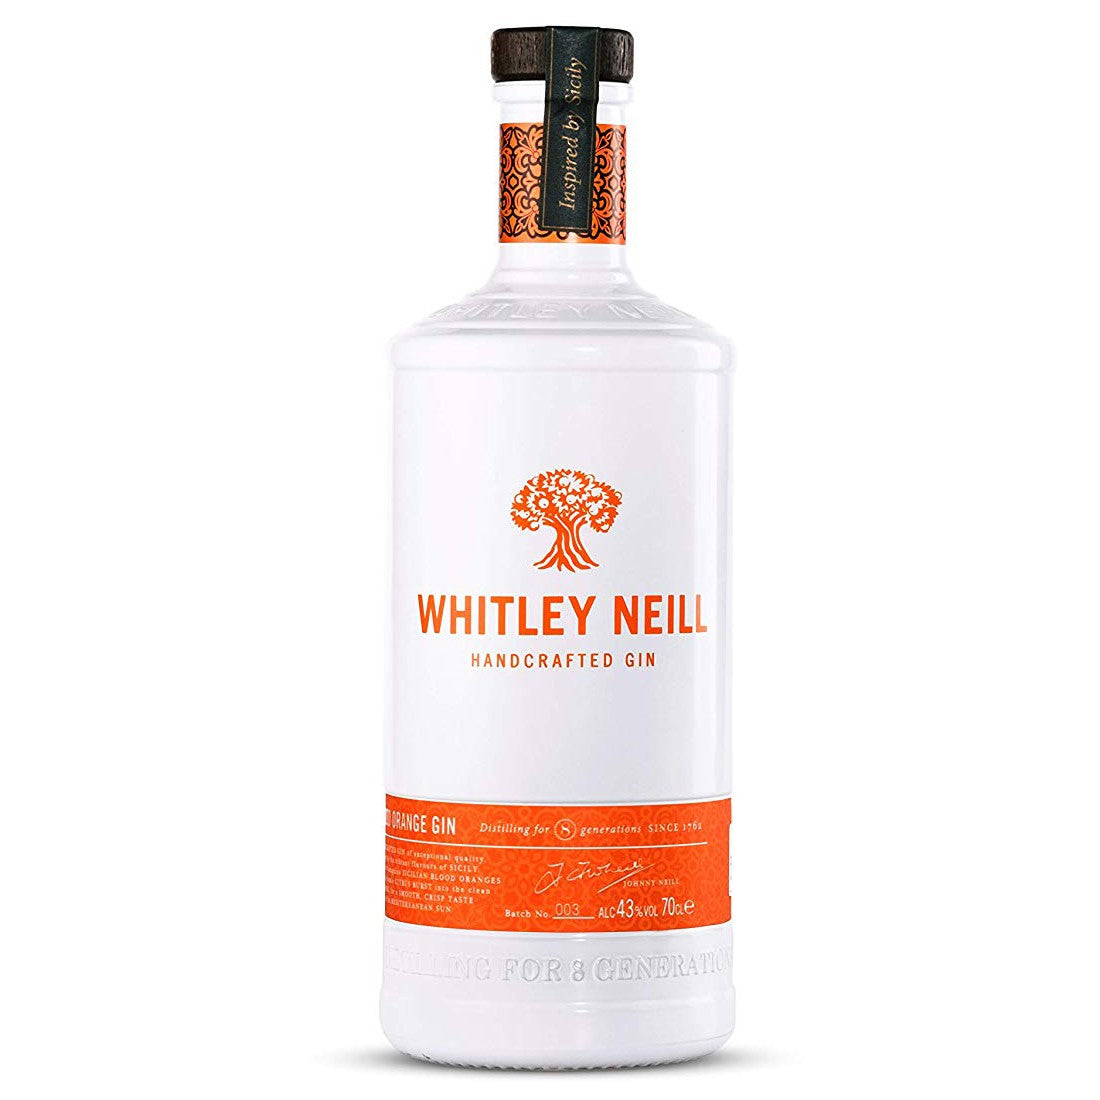 Whitley Neill Handcrafted Gin Blood Orange